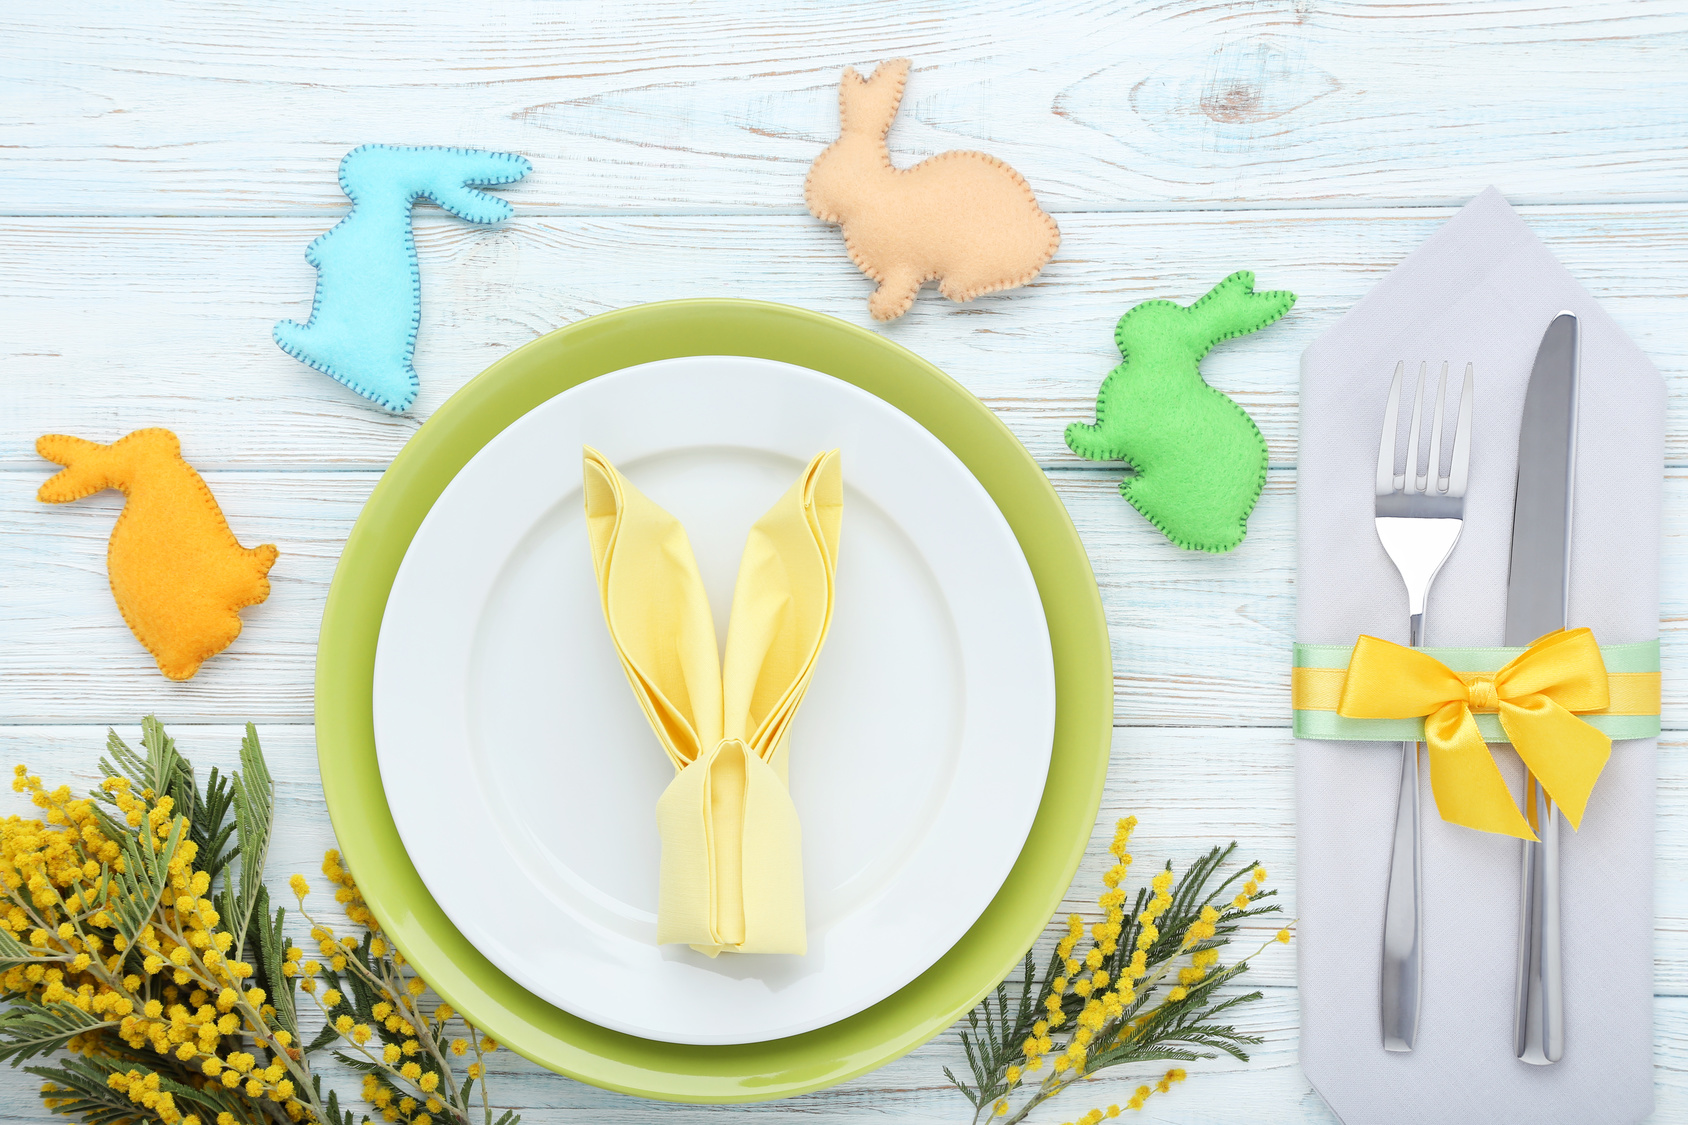 Kitchen cutlery with easter fabric rabbits and mimosa flowers on wooden table